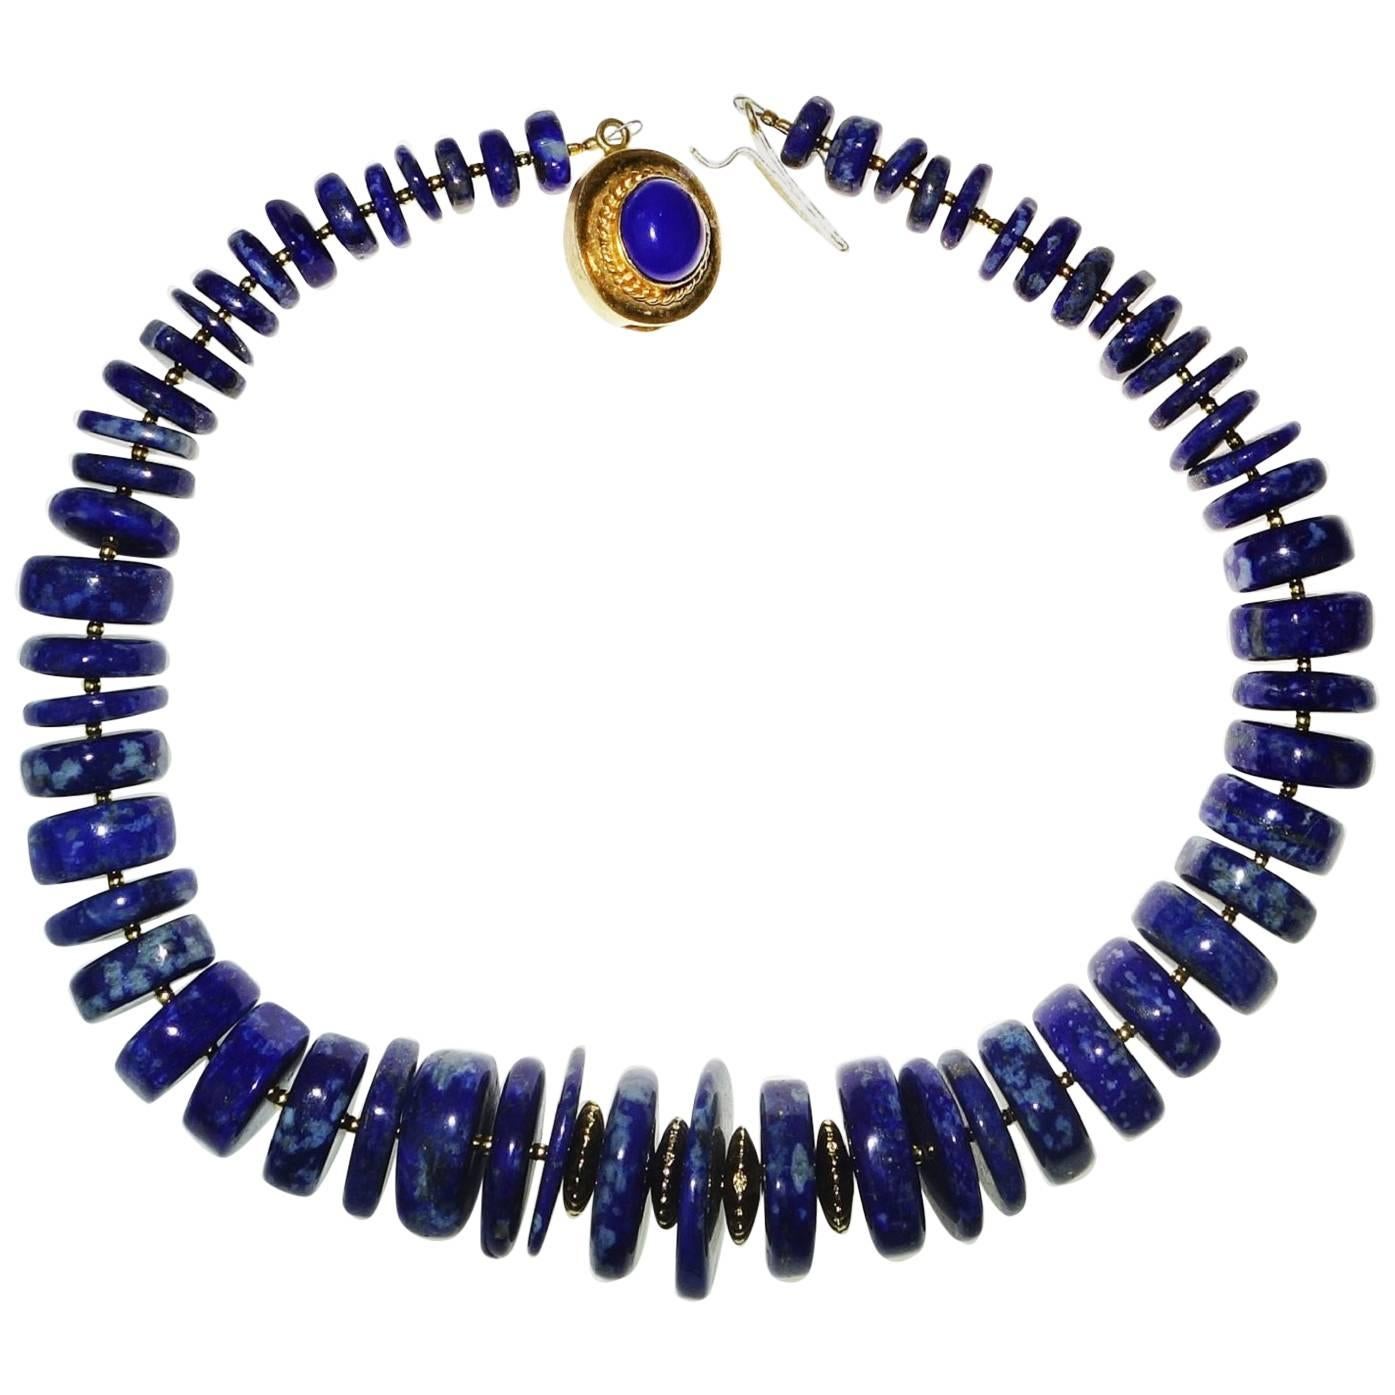 Custom made, spectacular 16 inch Choker of highly polished Lapis Lazuli rondelles with gold tone accents. The mixed widths of the Lapis Lazuli Rondelles accentuates the updated stylish look of this choker length necklace. Because these are large